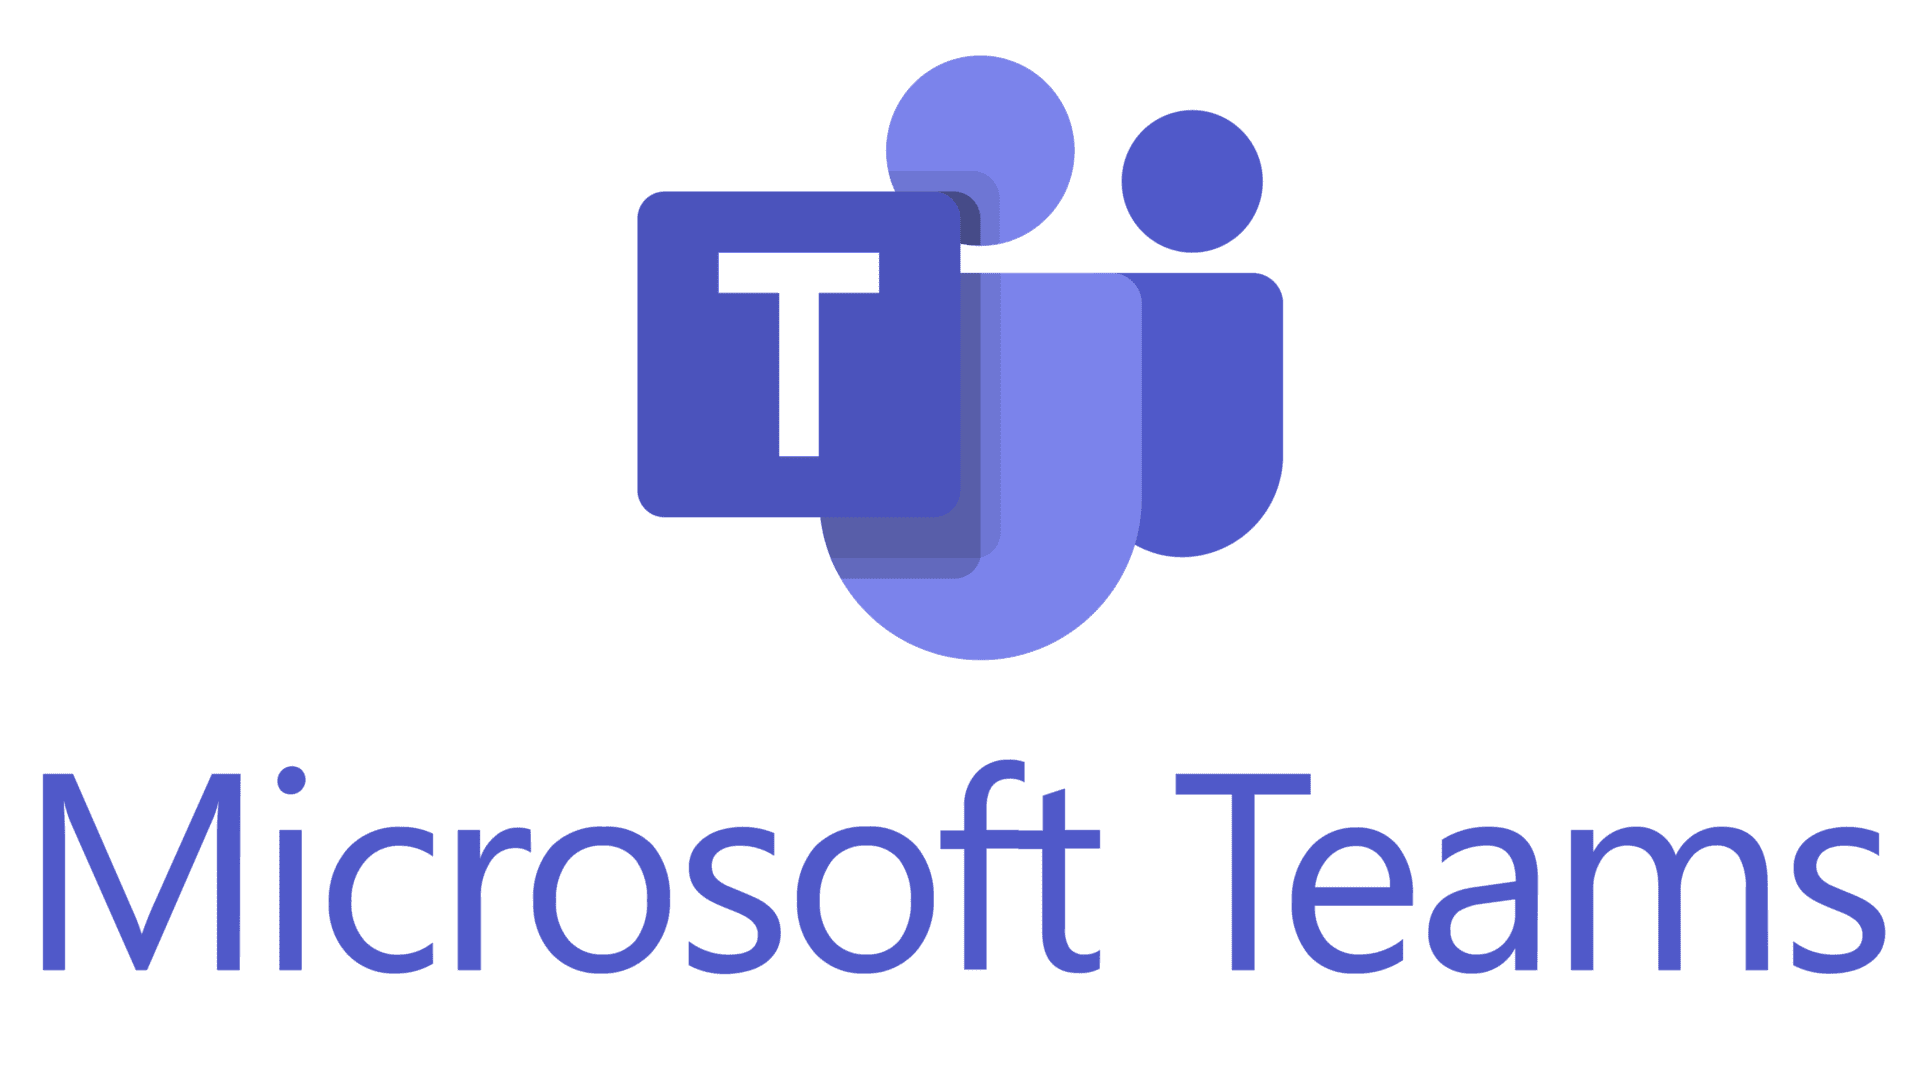 A logo of microsoft teams is shown.